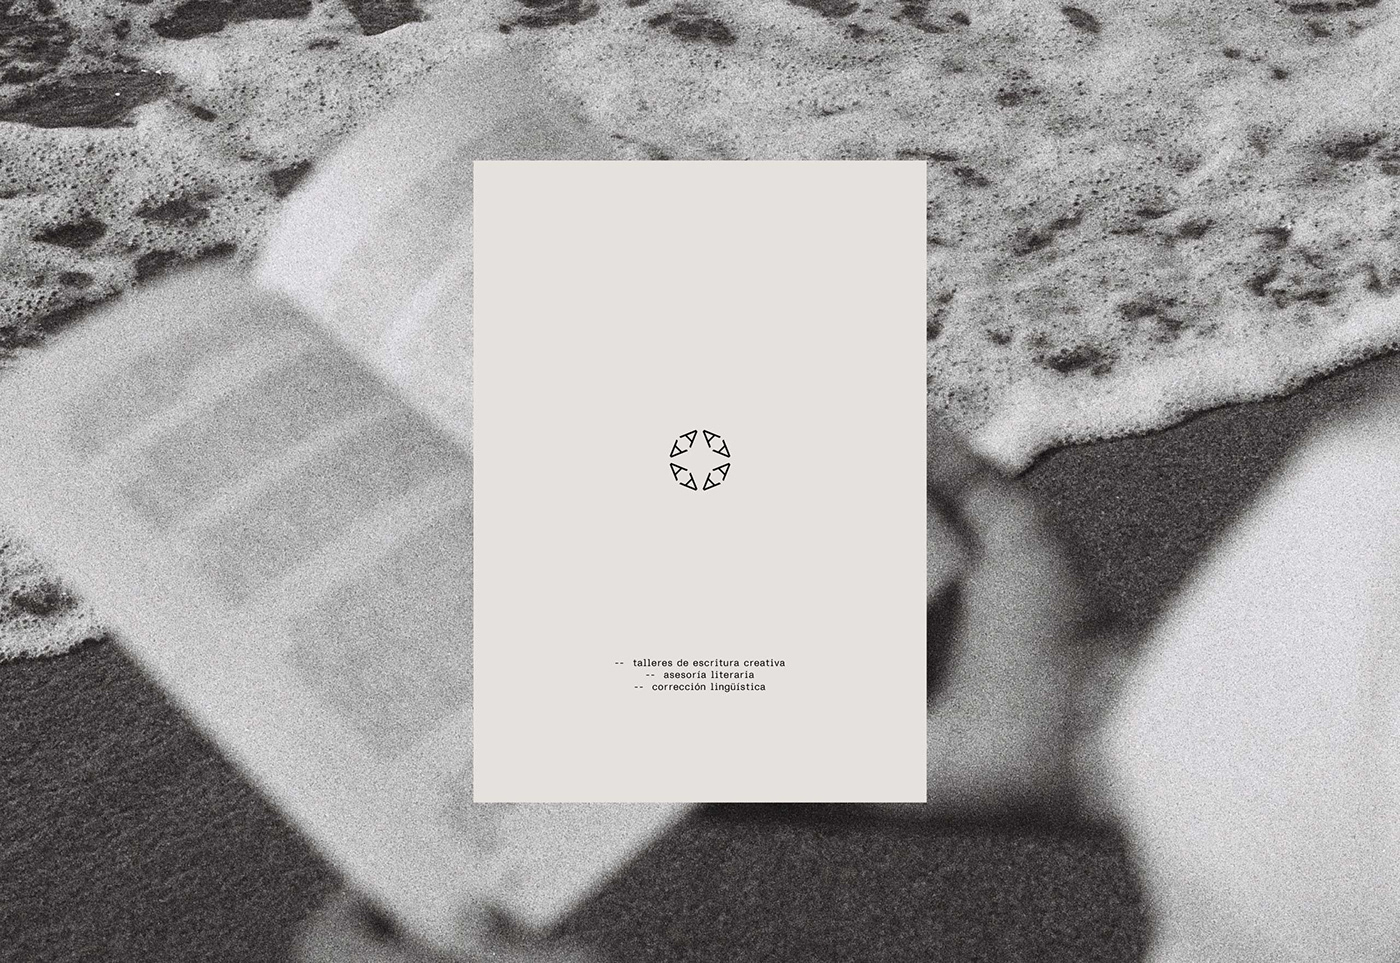 Ana Haro's brand identity on a book against a sandy beach backdrop